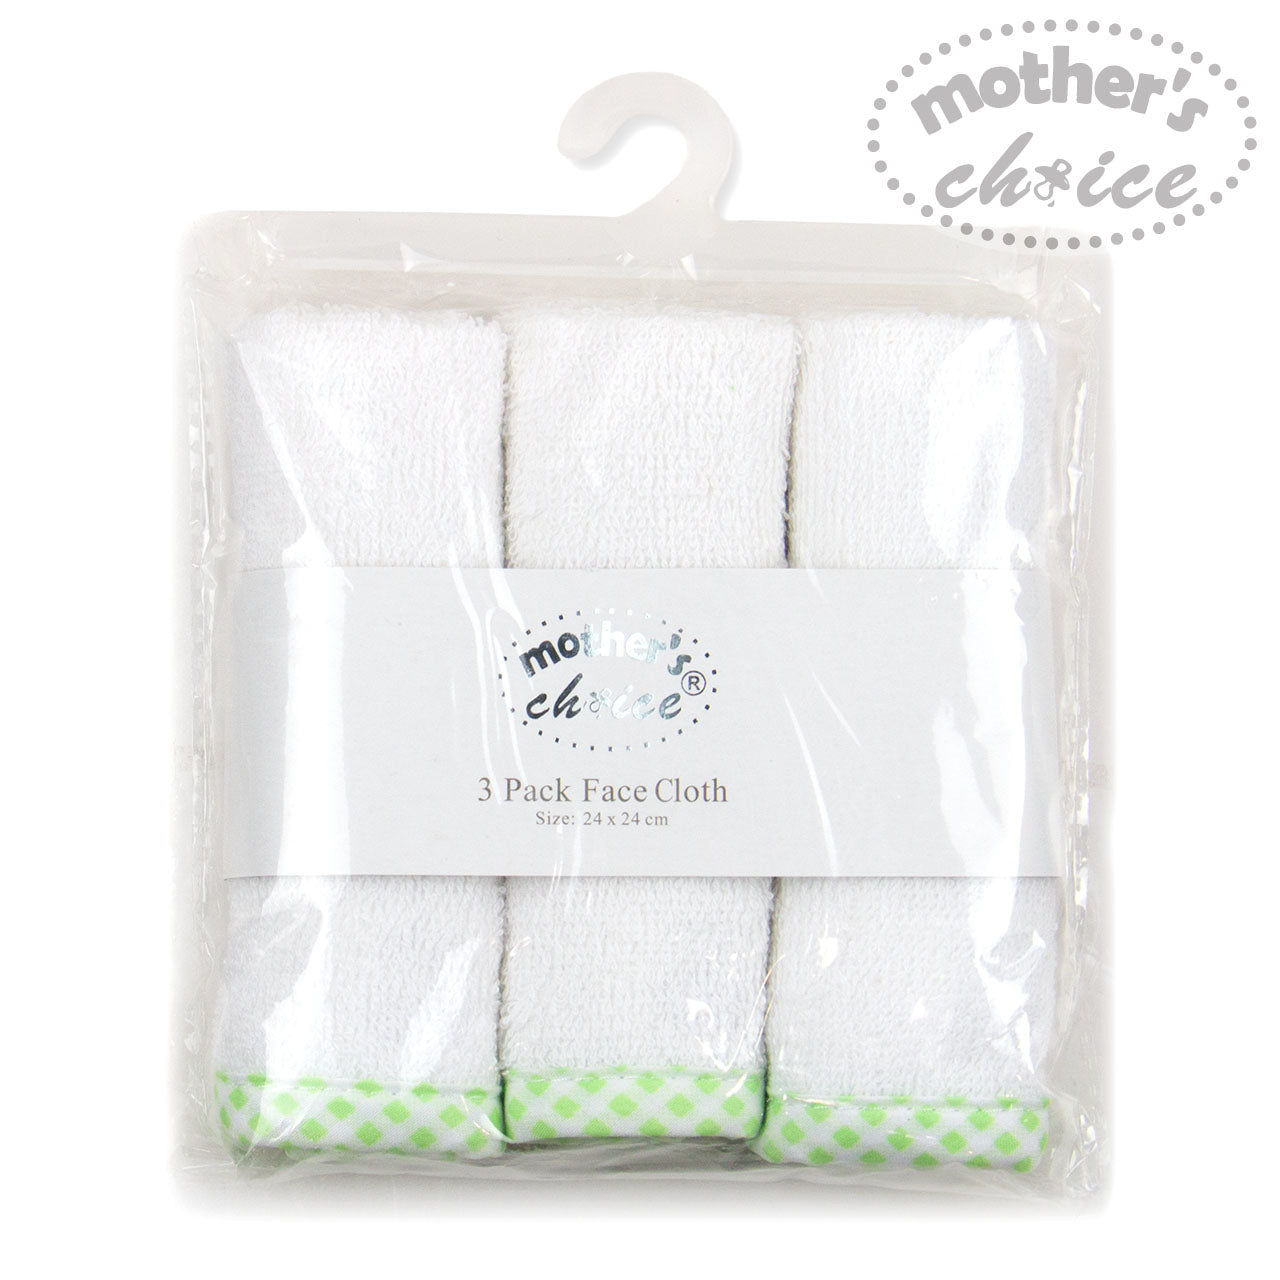 Motherschoice Baby Face Cloth Pack of 3 Assorted IT8433 (24 x 24 cm) Age- Newborn & Above